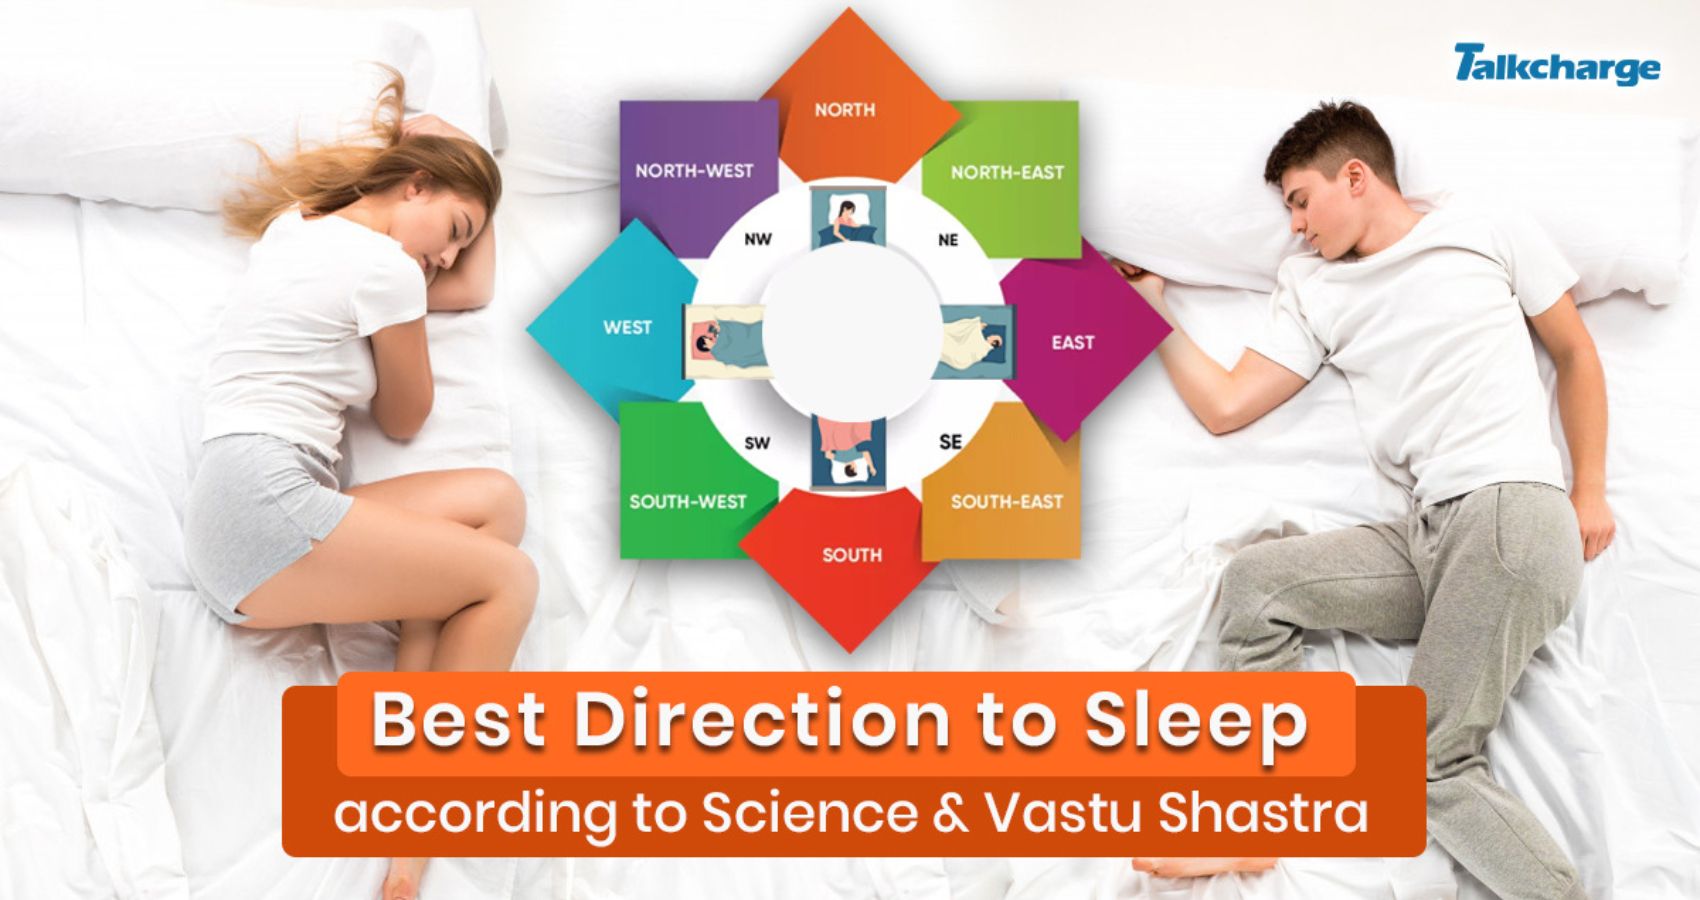 East, South, West, Or North: What Is The Best Direction To Sleep?